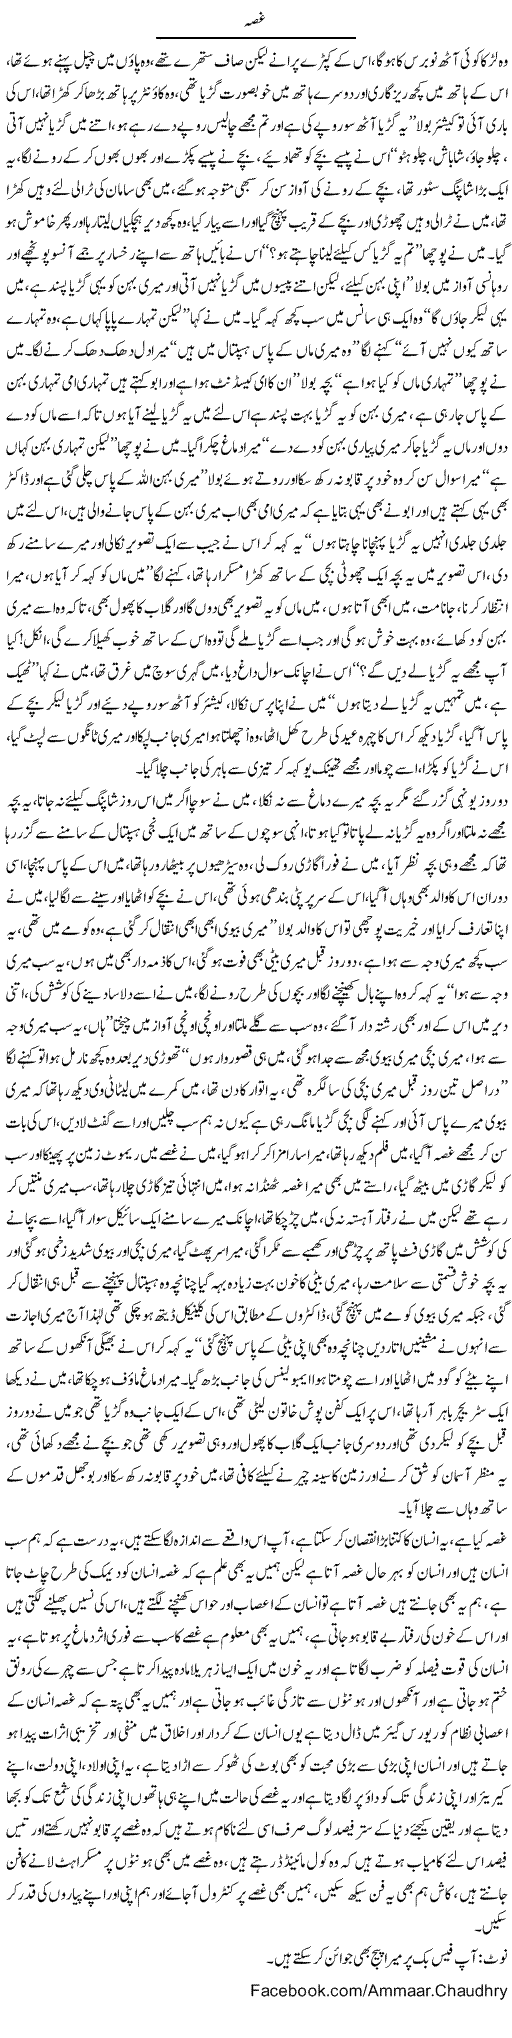 Story of a Boy Express Column Amad Chaudhry 16 October 2011